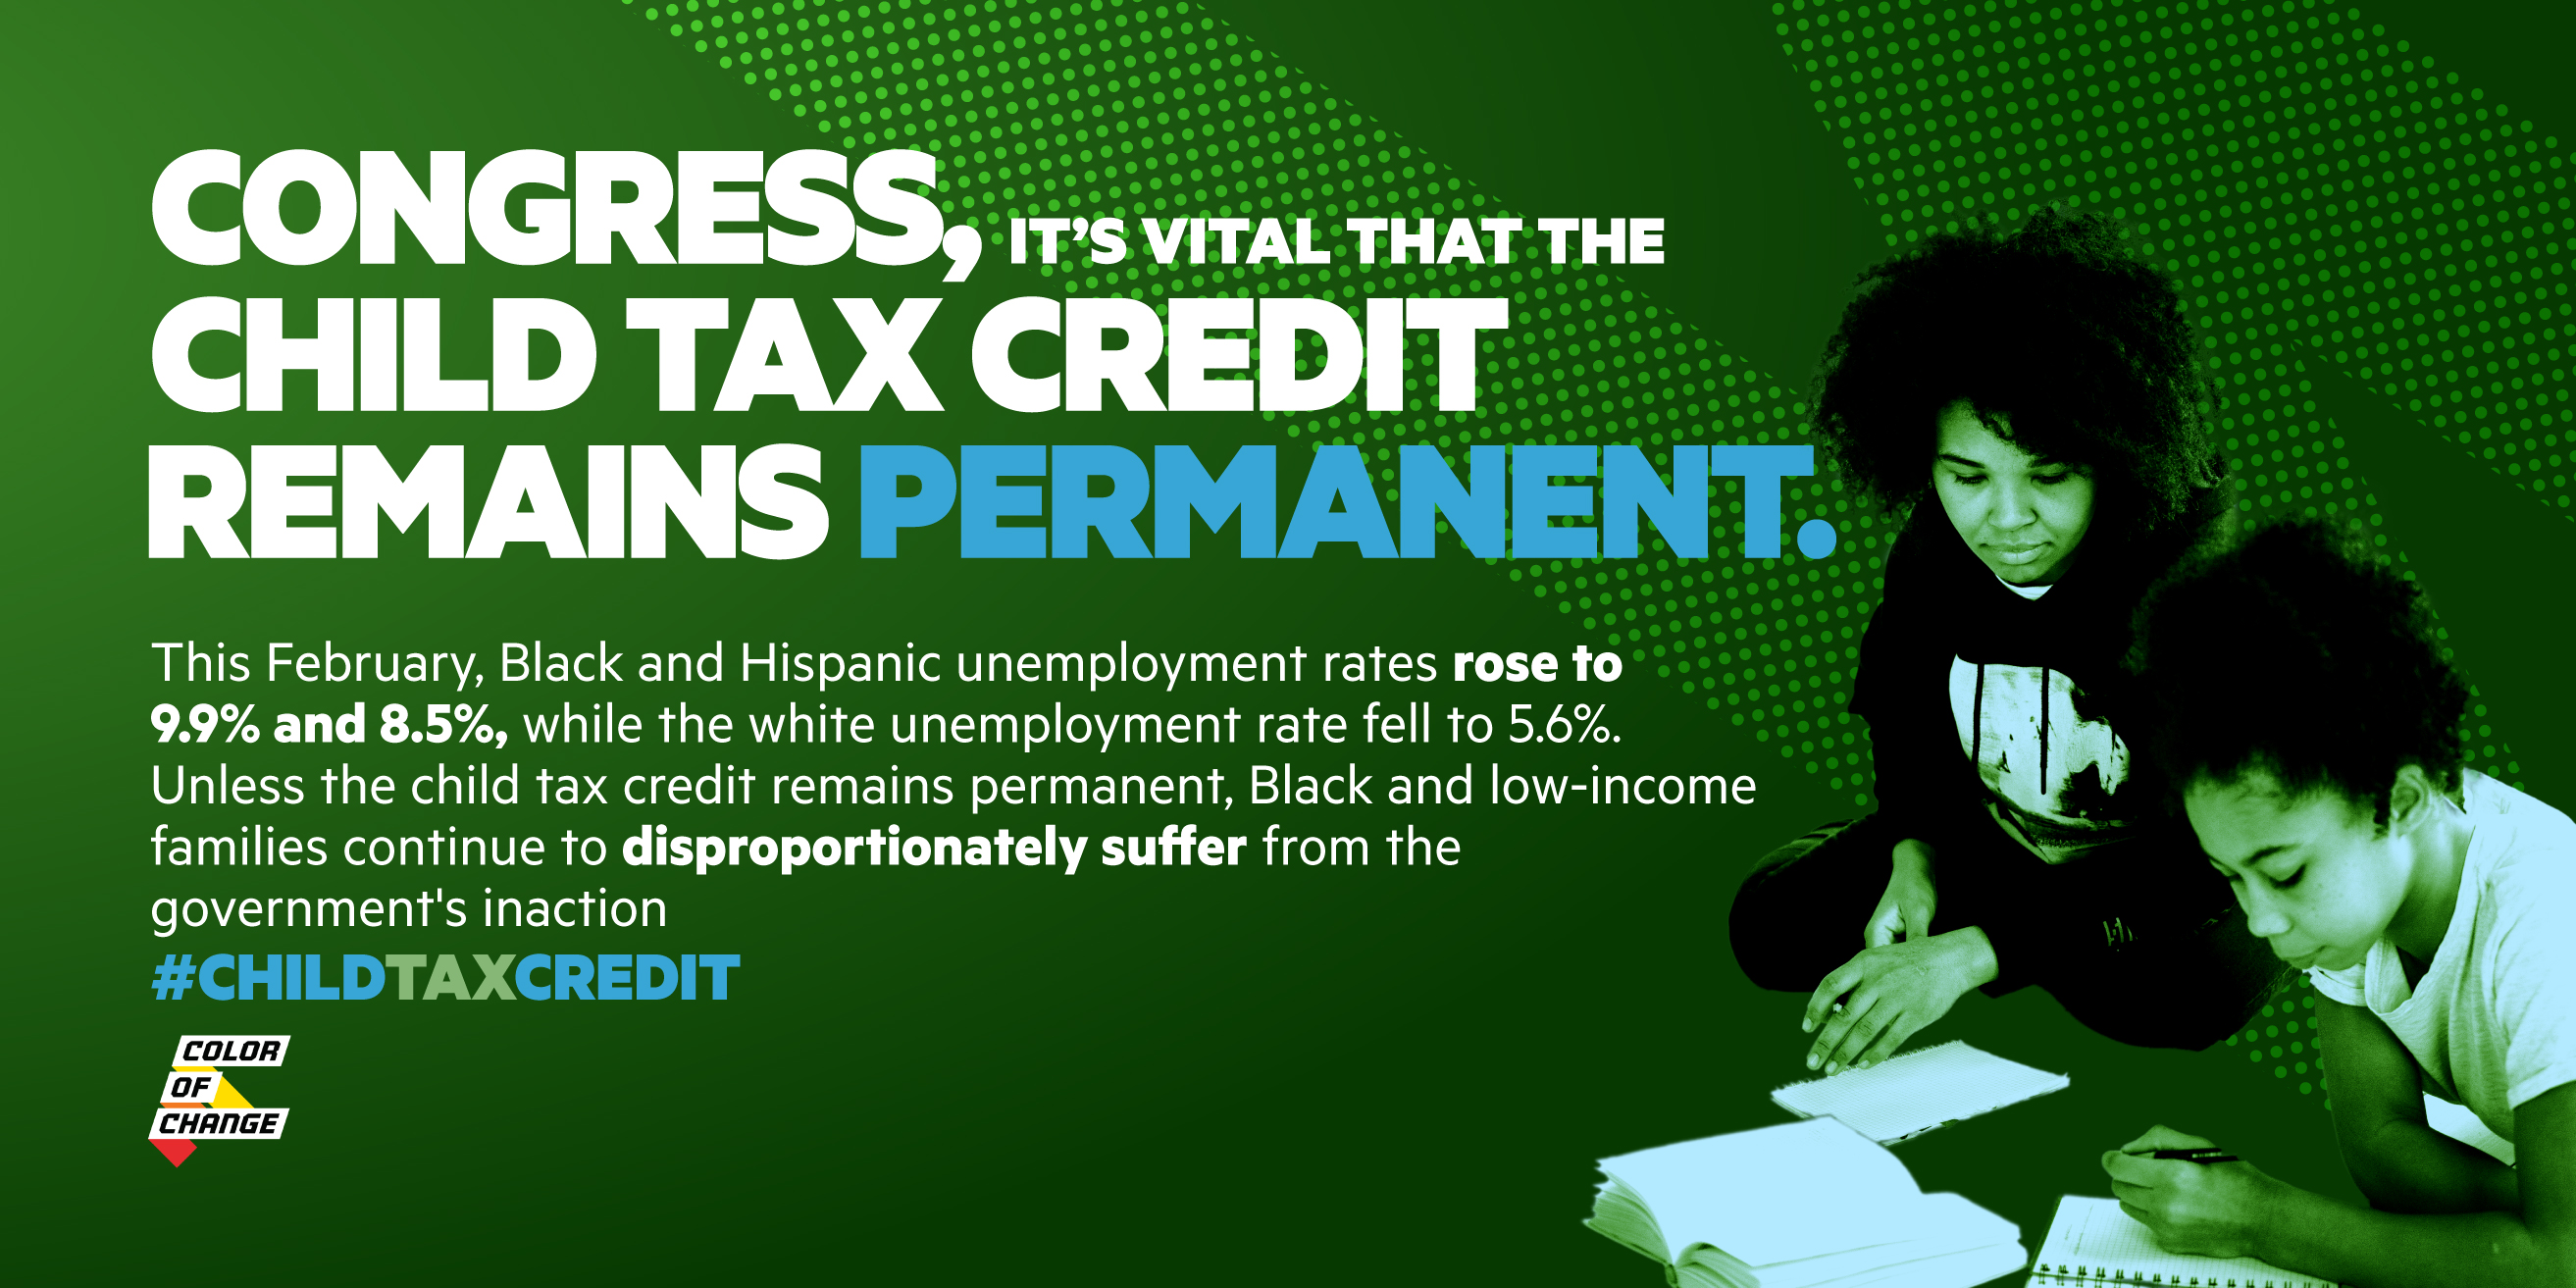 Green background with majority white text that reads: “Congress, it’s vital that the child tax credit remains permanent. This February, Black and Hispanic unemployment rates rose to 9.9% and 8.5%, while the white unemployment rate fell to 5.6%. Unless the child tax credit remains permanent, Black and low-income families continue to disproportionately suffer from the government’s inaction. #ChildTaxCredit”